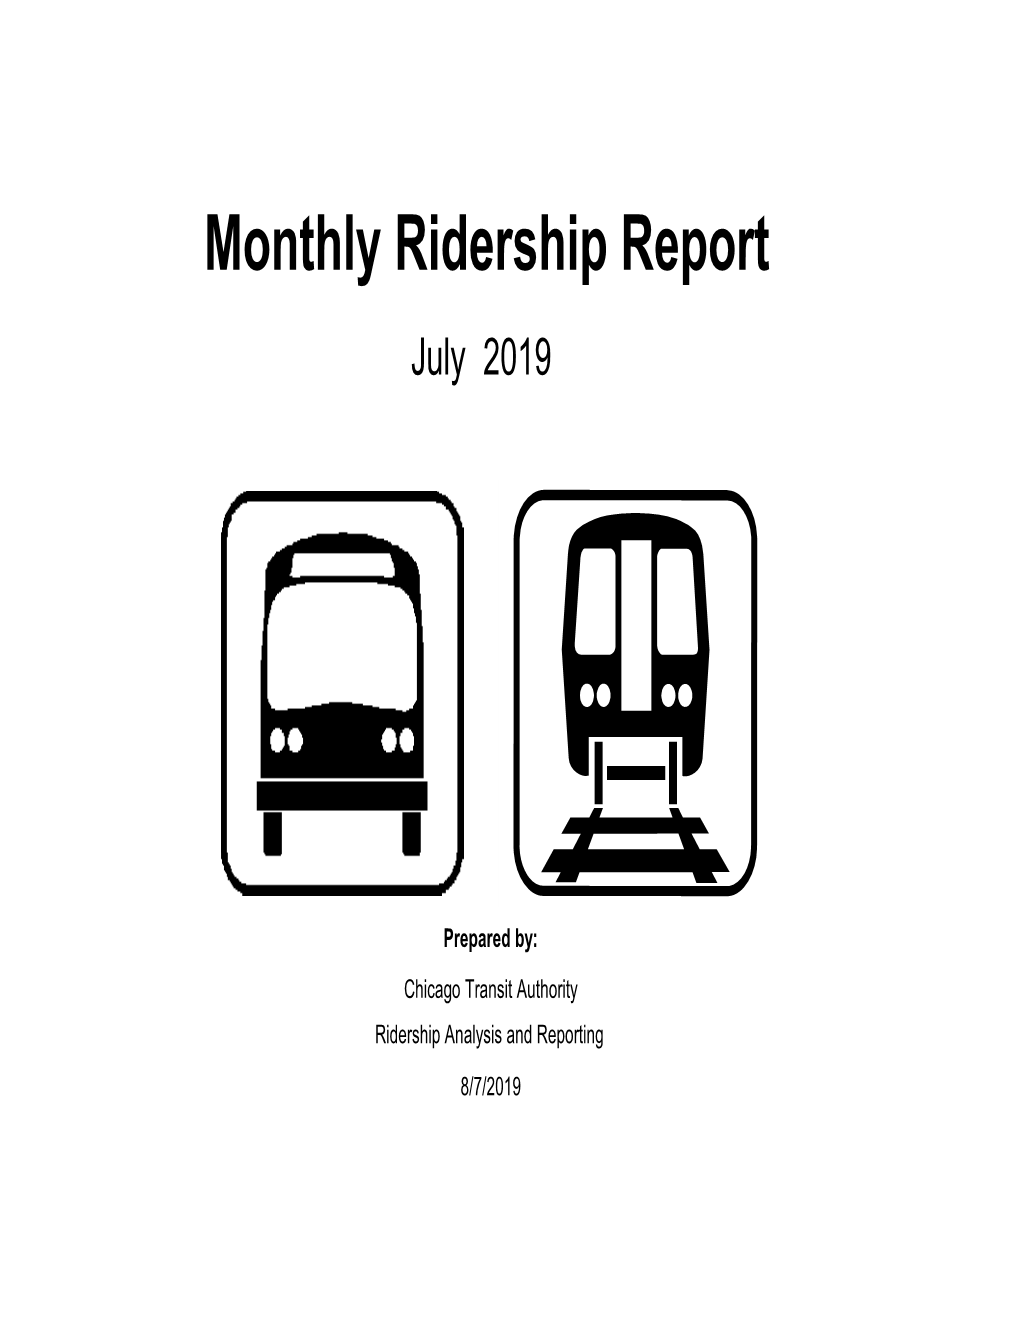 Monthly Ridership Report July 2019